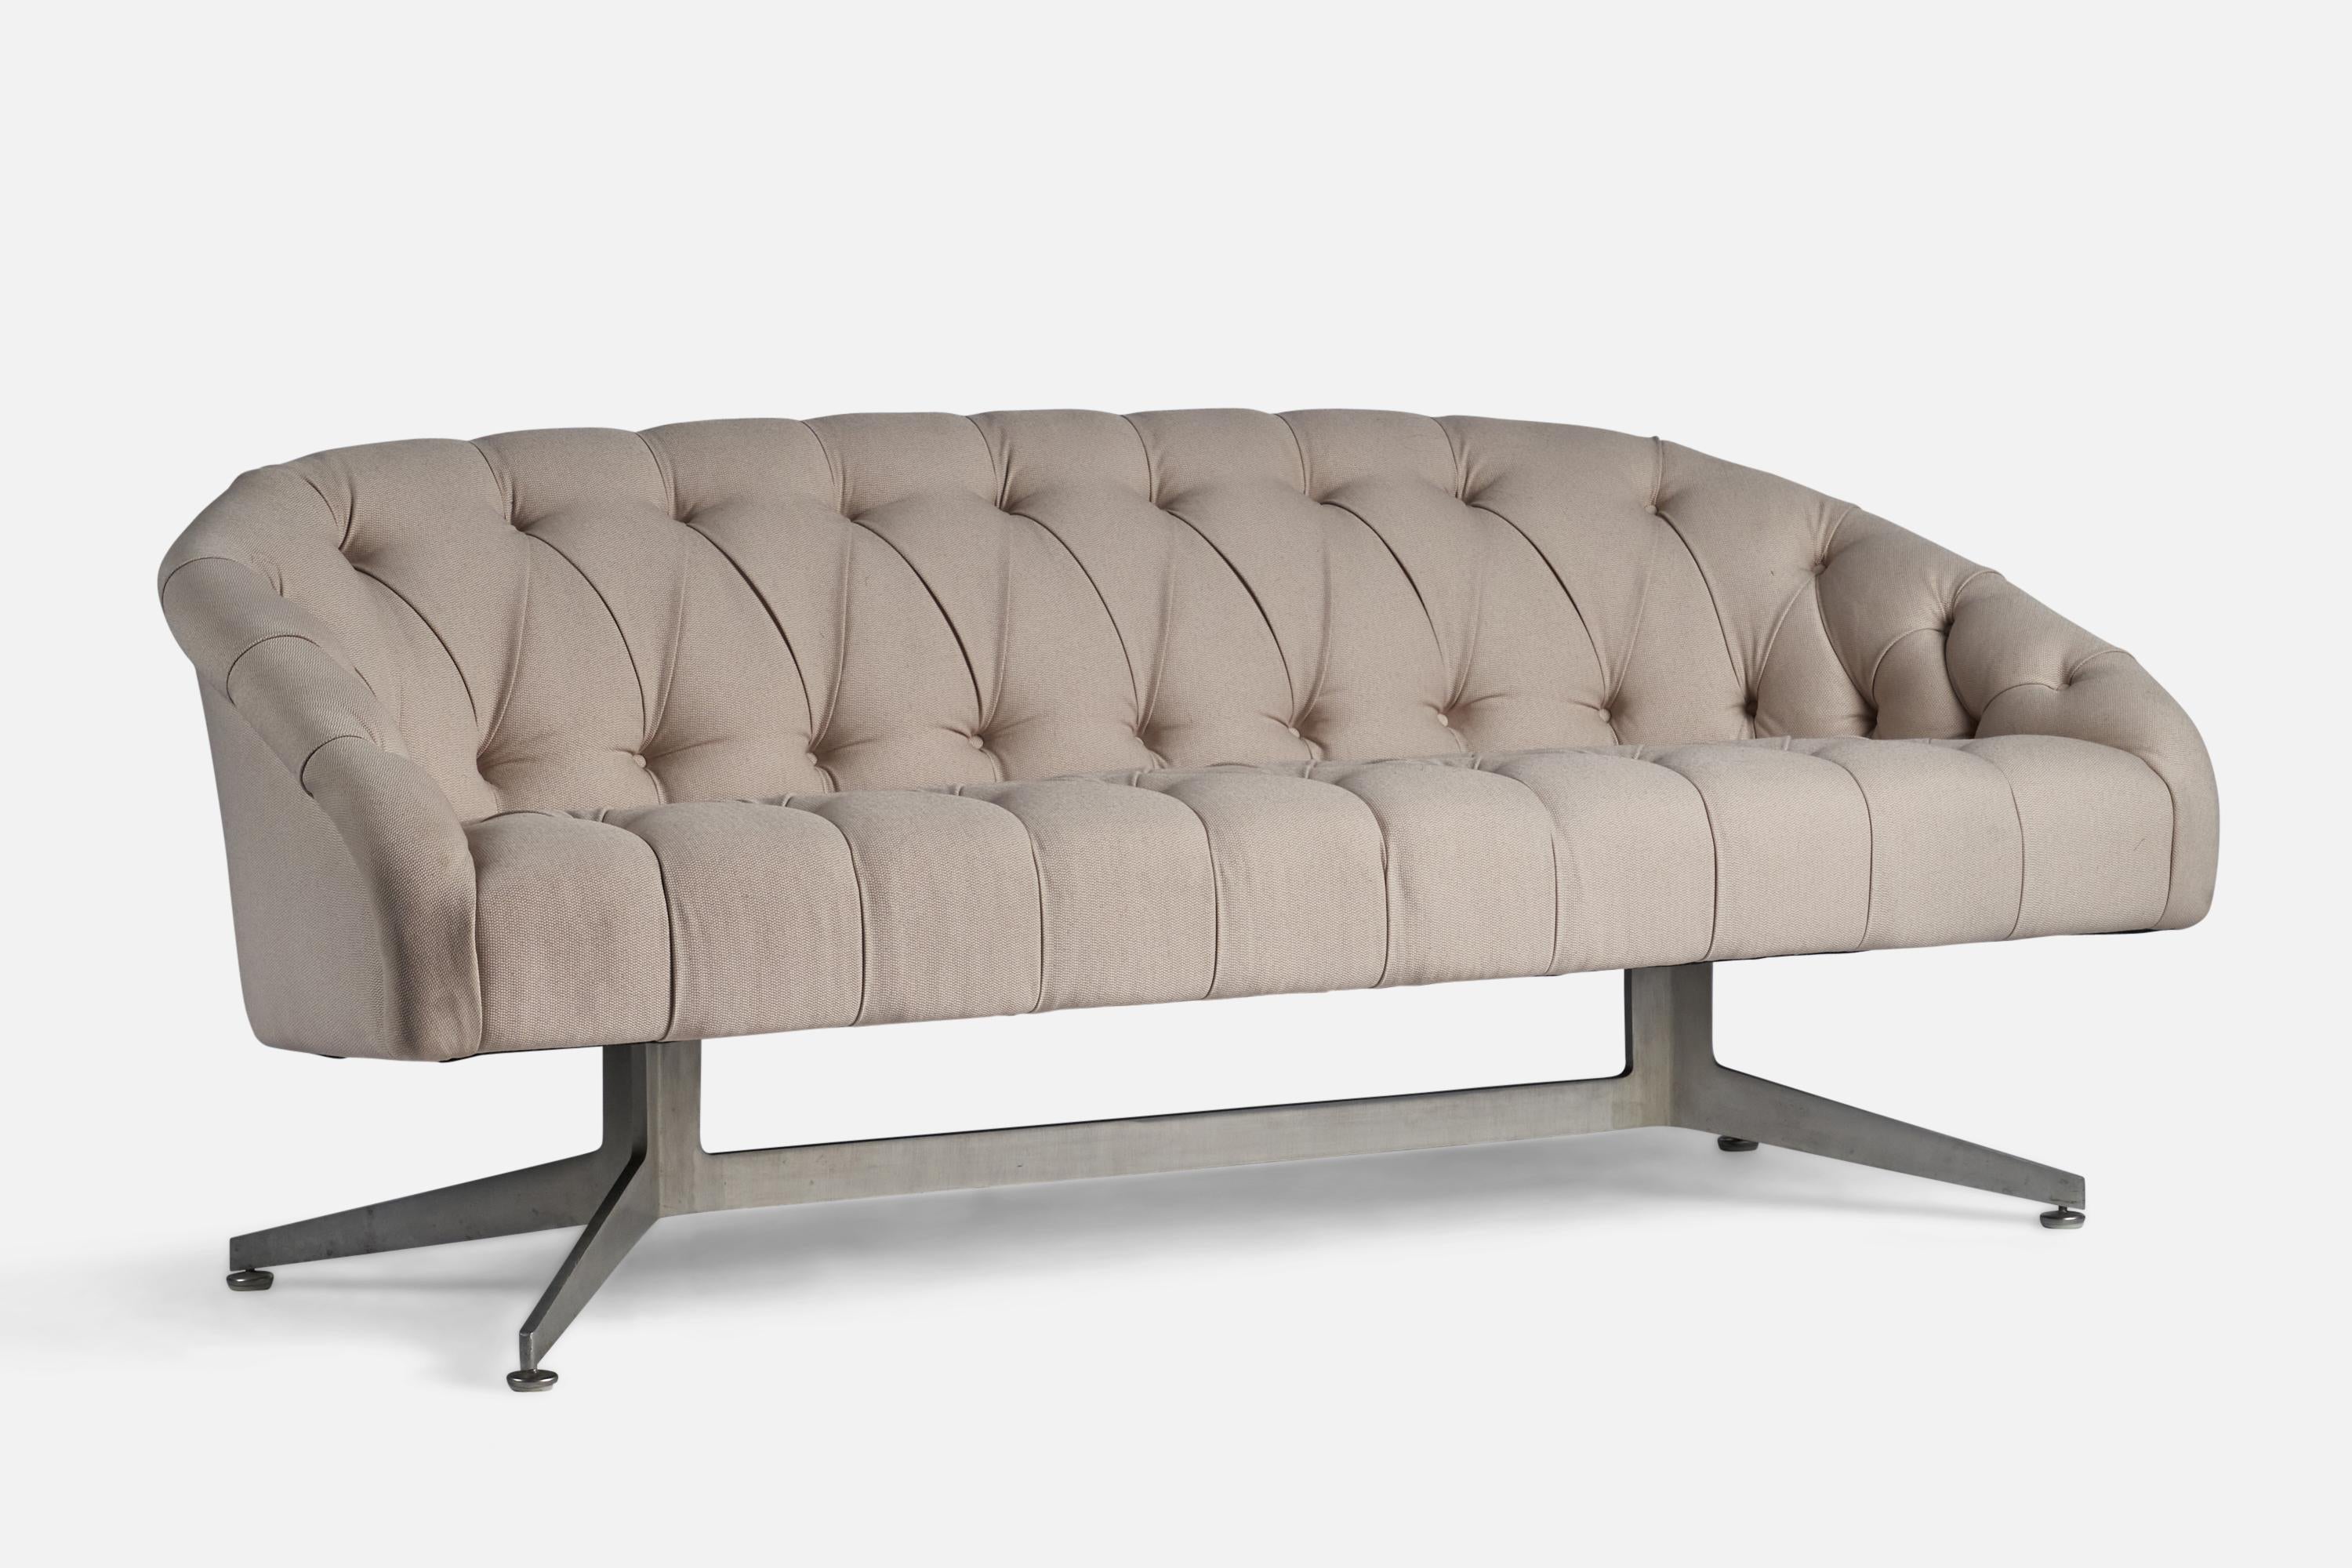 An aluminium and light grey fabric sofa designed by Ward Bennet and produced by Lehigh Leopold, USA, c. 1950s.
18” seat height.